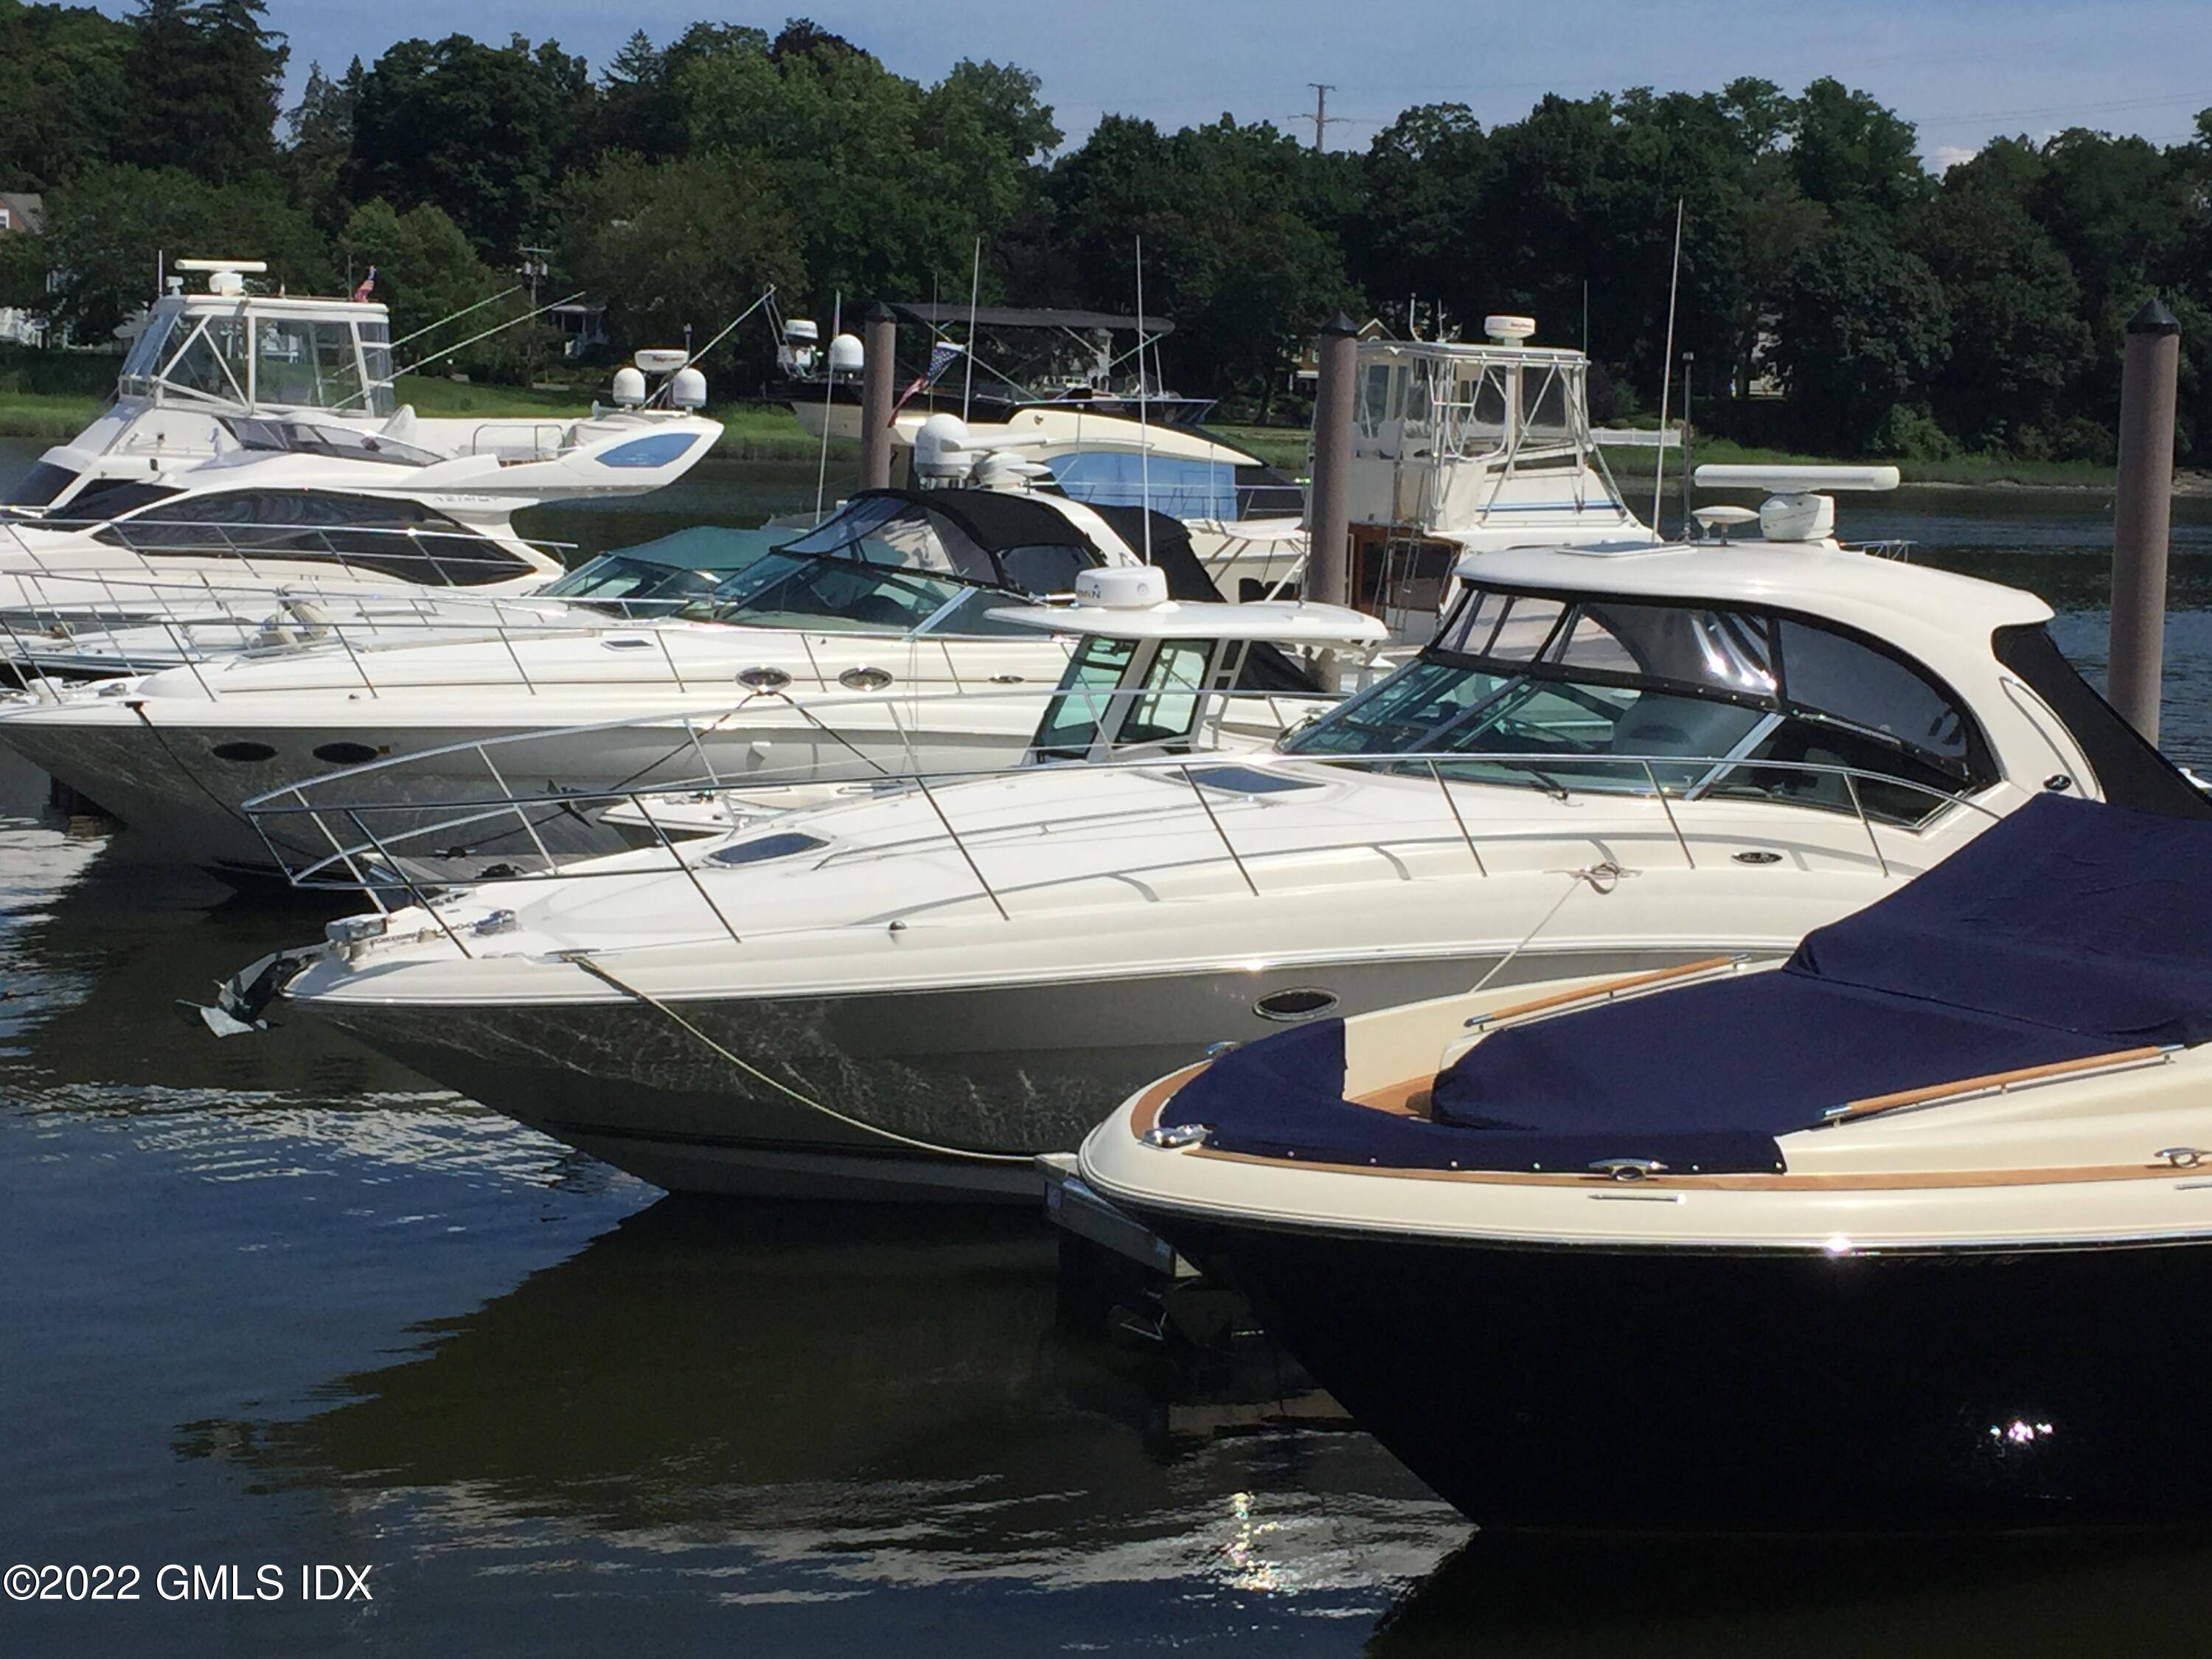 If your favorite boat deserves a beautiful home, Palmer Point is the right choice for you.